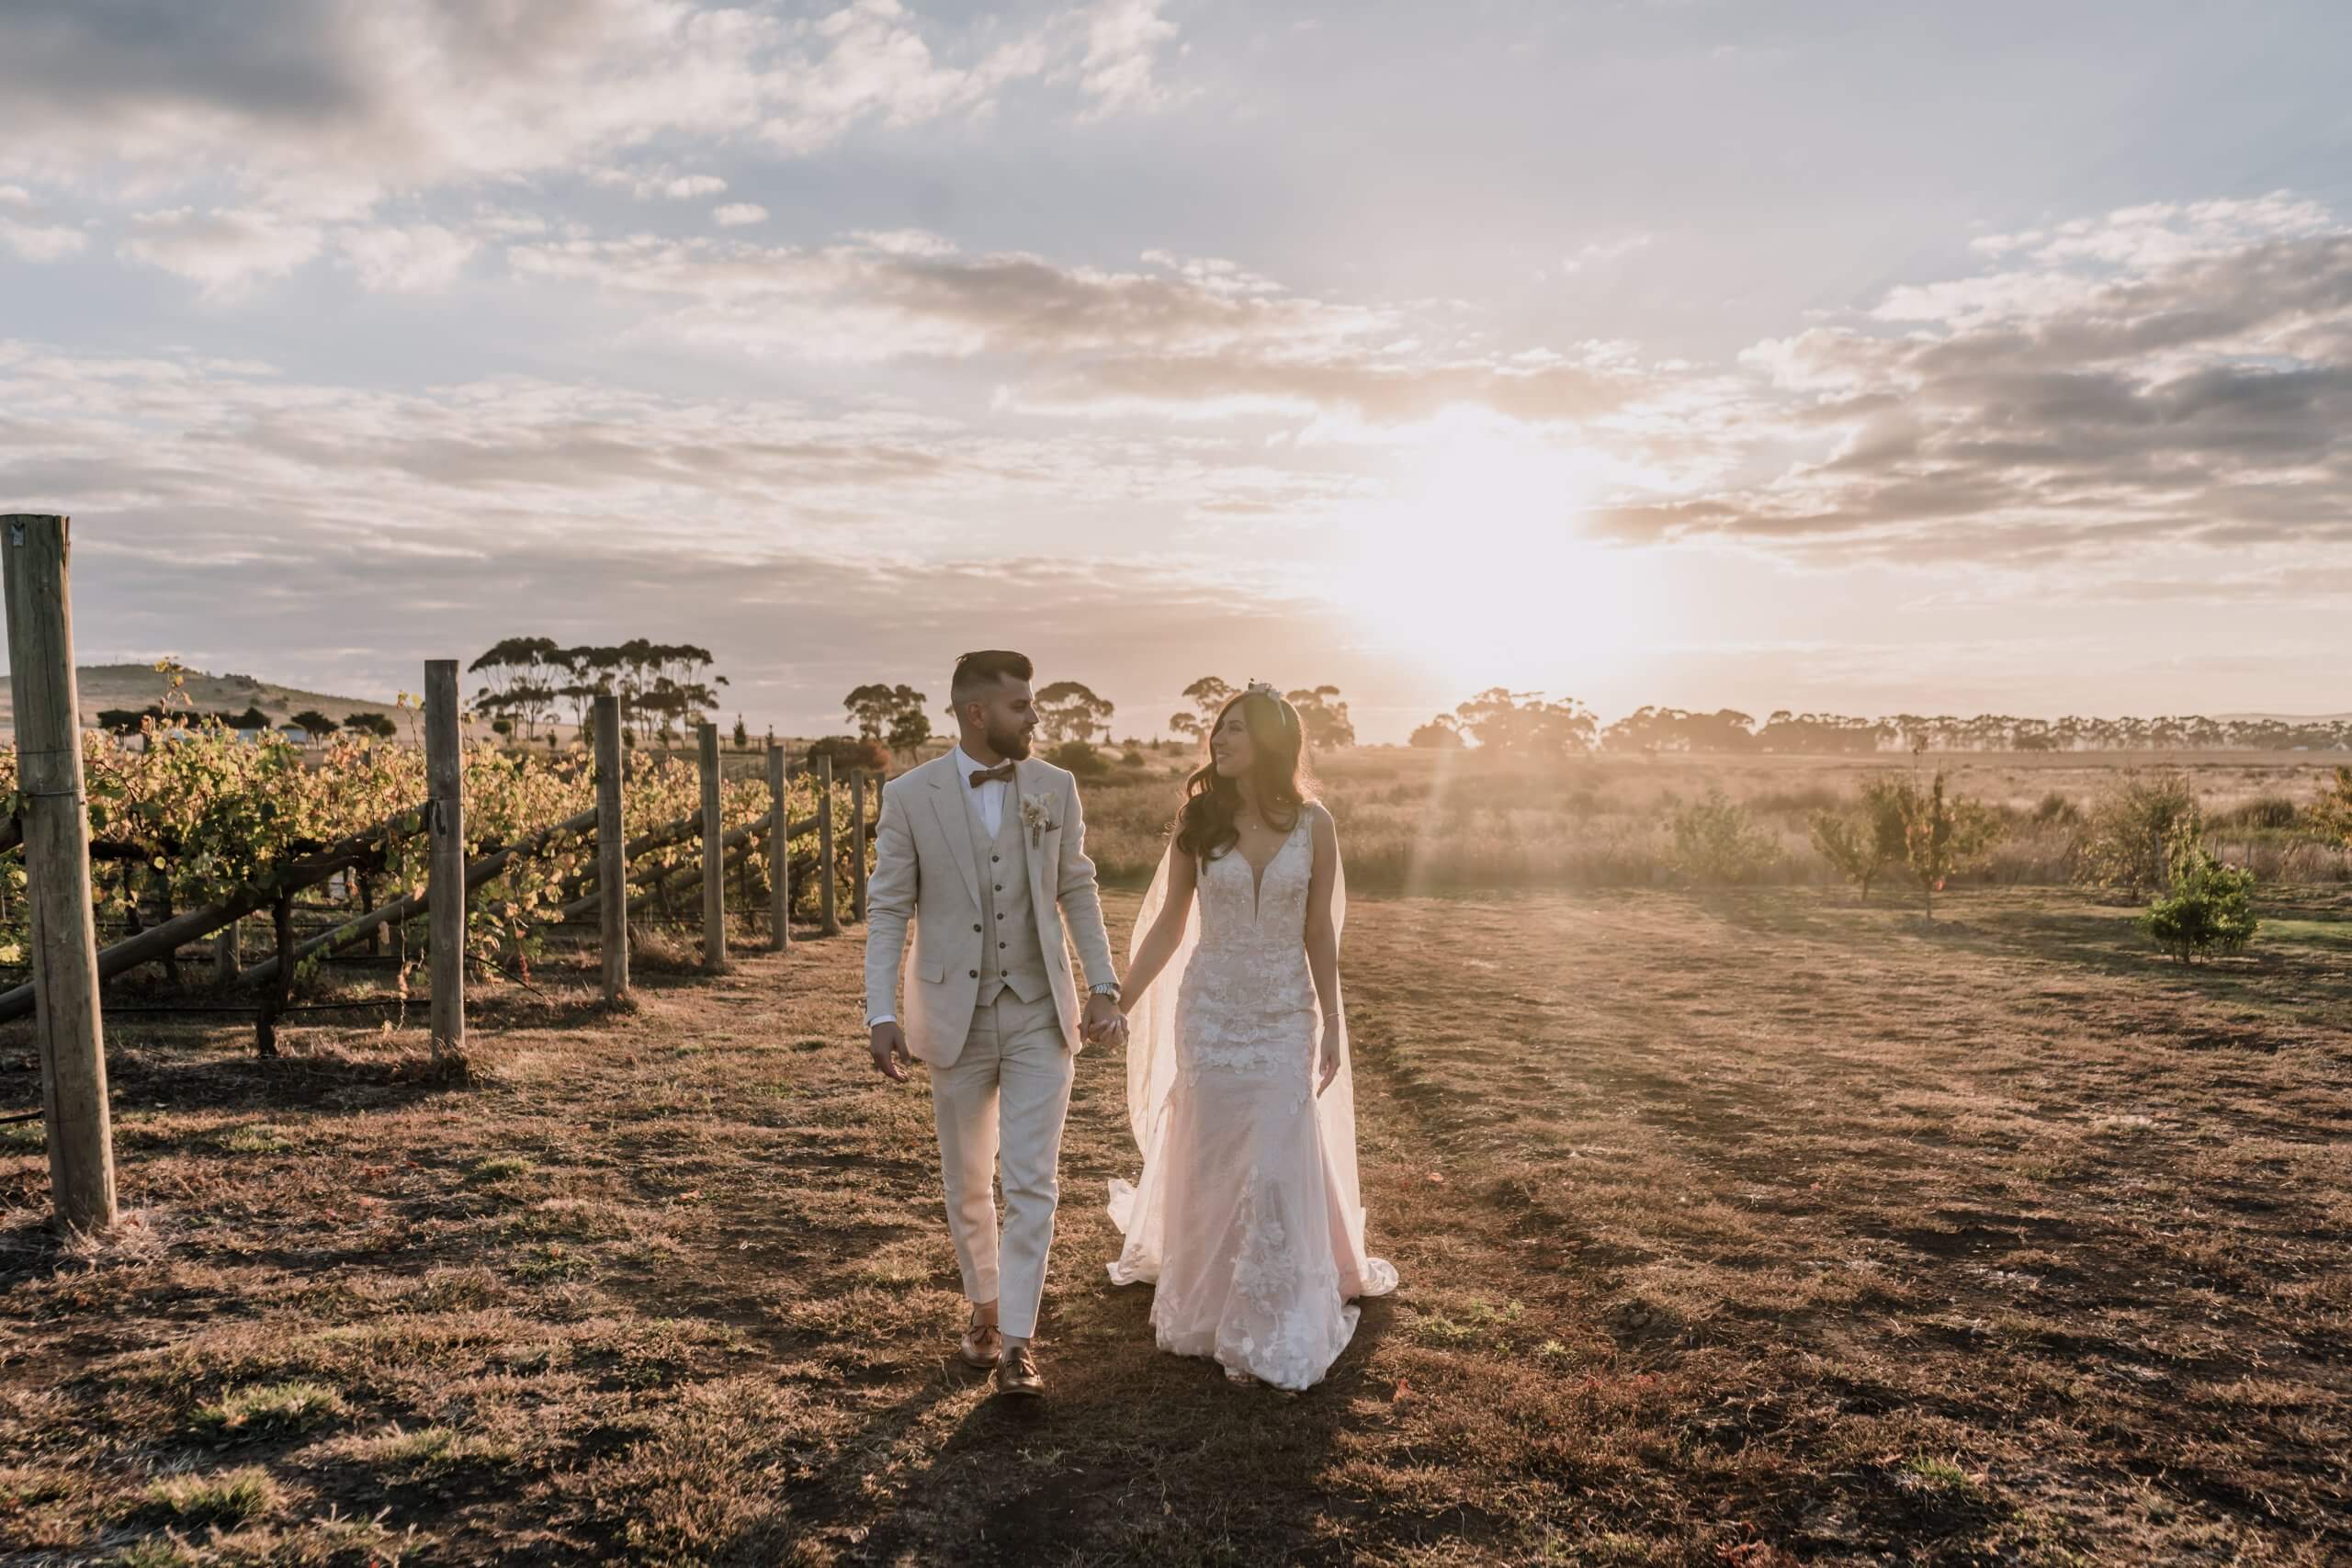 Bride and groom walking hand in hand in the middle of the winery and with the setting sun accentuating their silhouette.